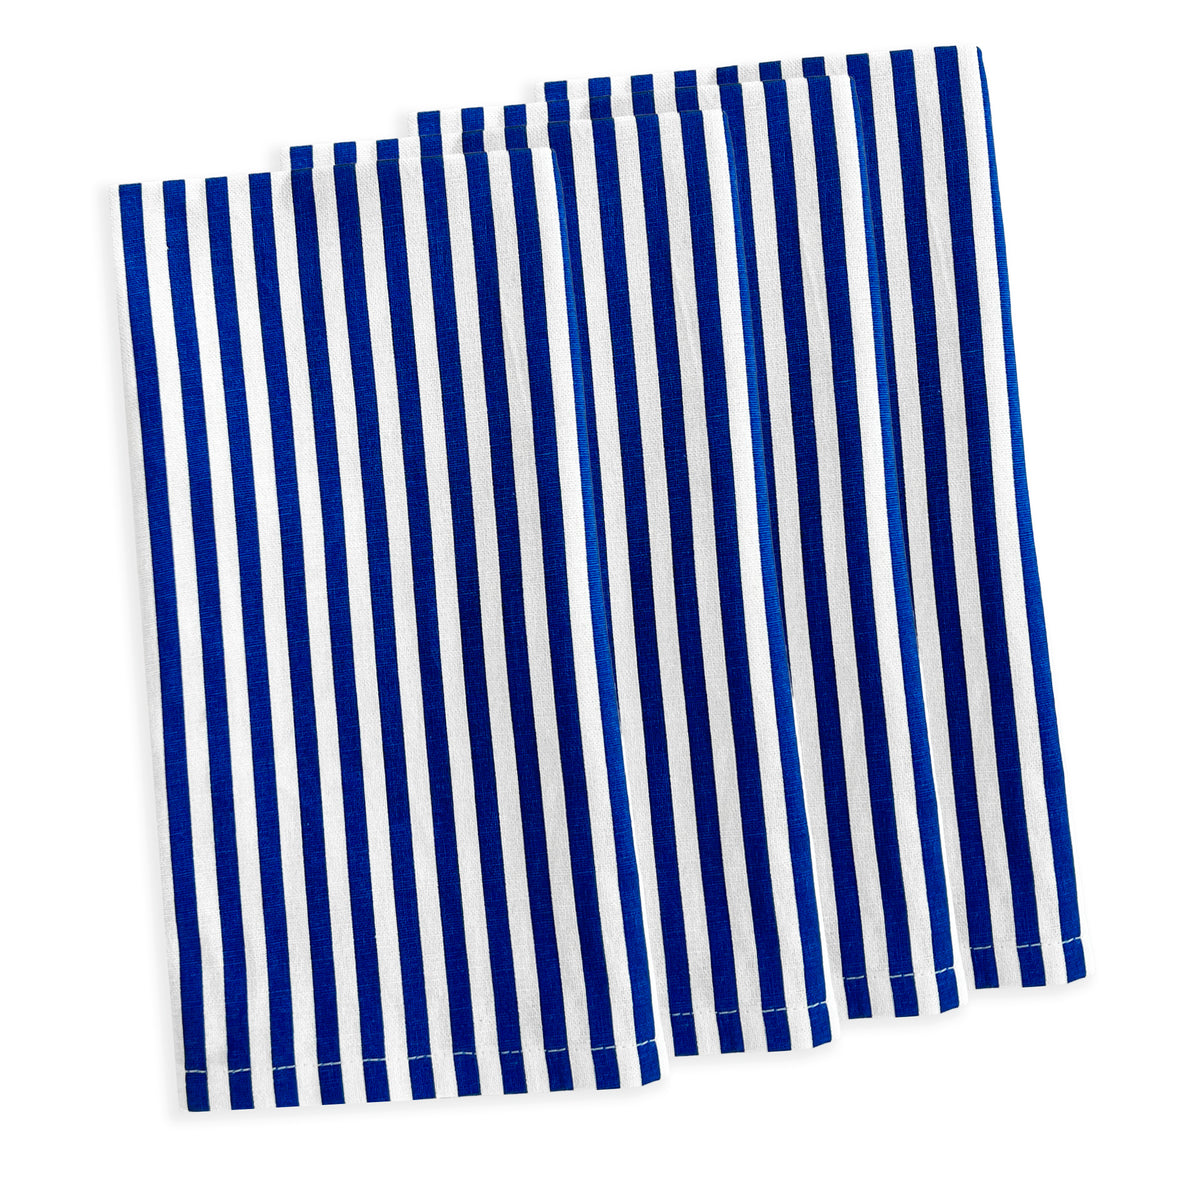 Crisp Pinstriped Oversized Napkins in Blue from Caskata are made of 100% cotton sold as a Set of 4.